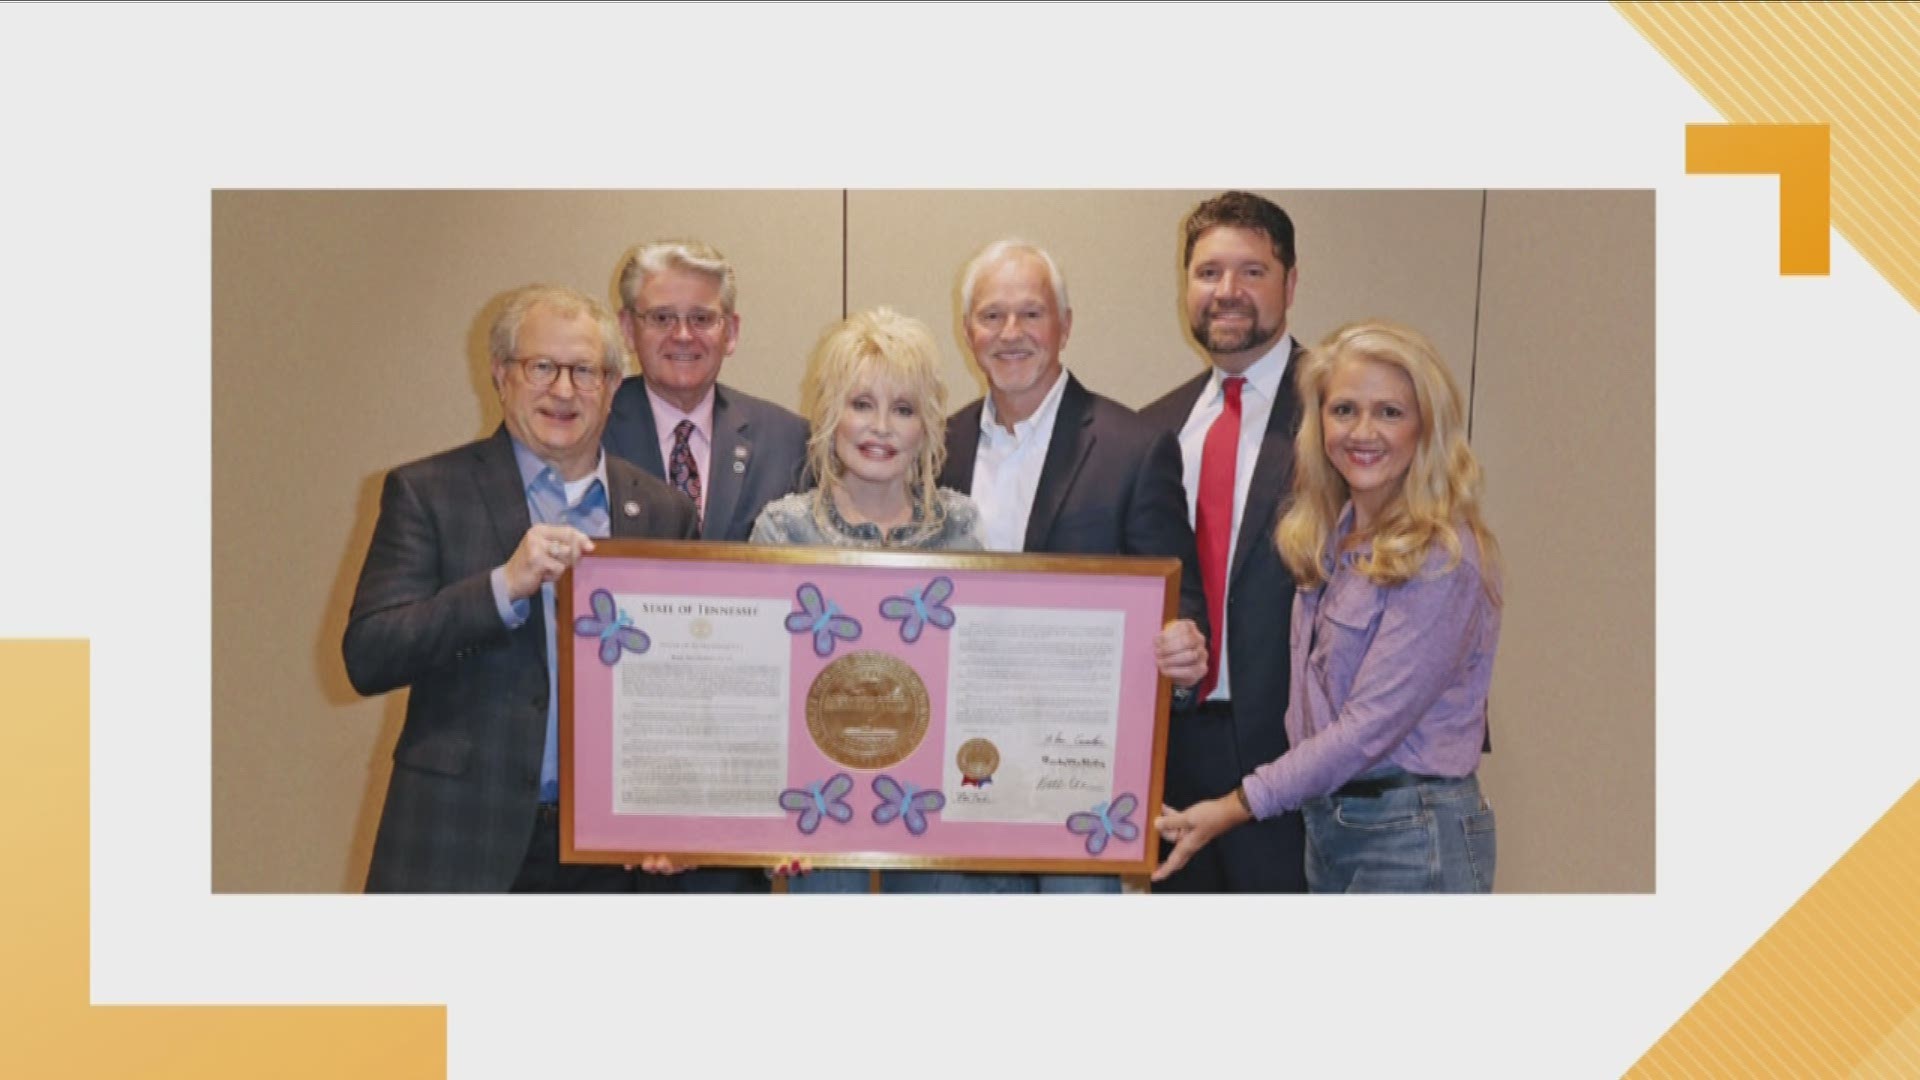 The Tennessee House of Representatives presented Dolly with a resolution recognizing her as "a beloved Tennessean and cultural icon."